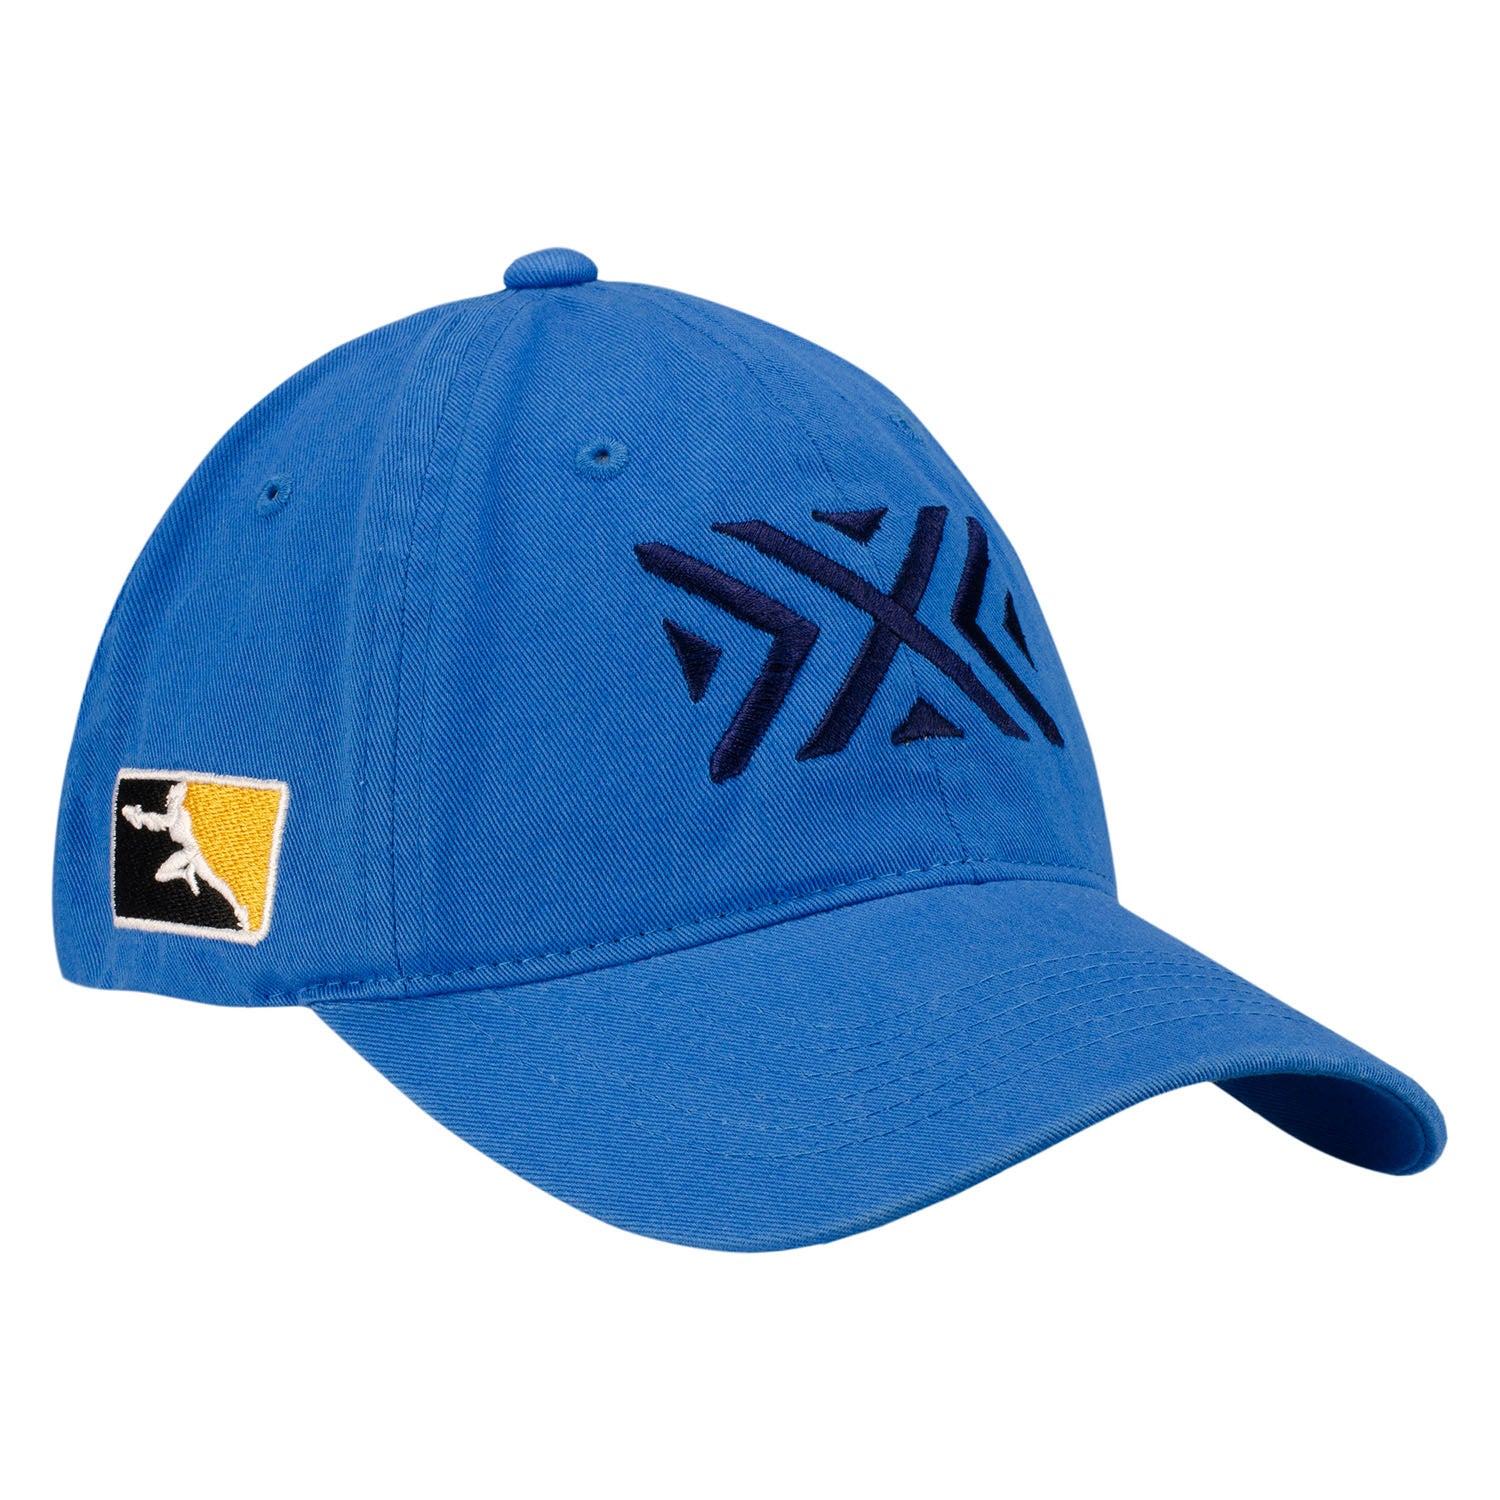 New York Excelsior Blue Dad Hat - Right View